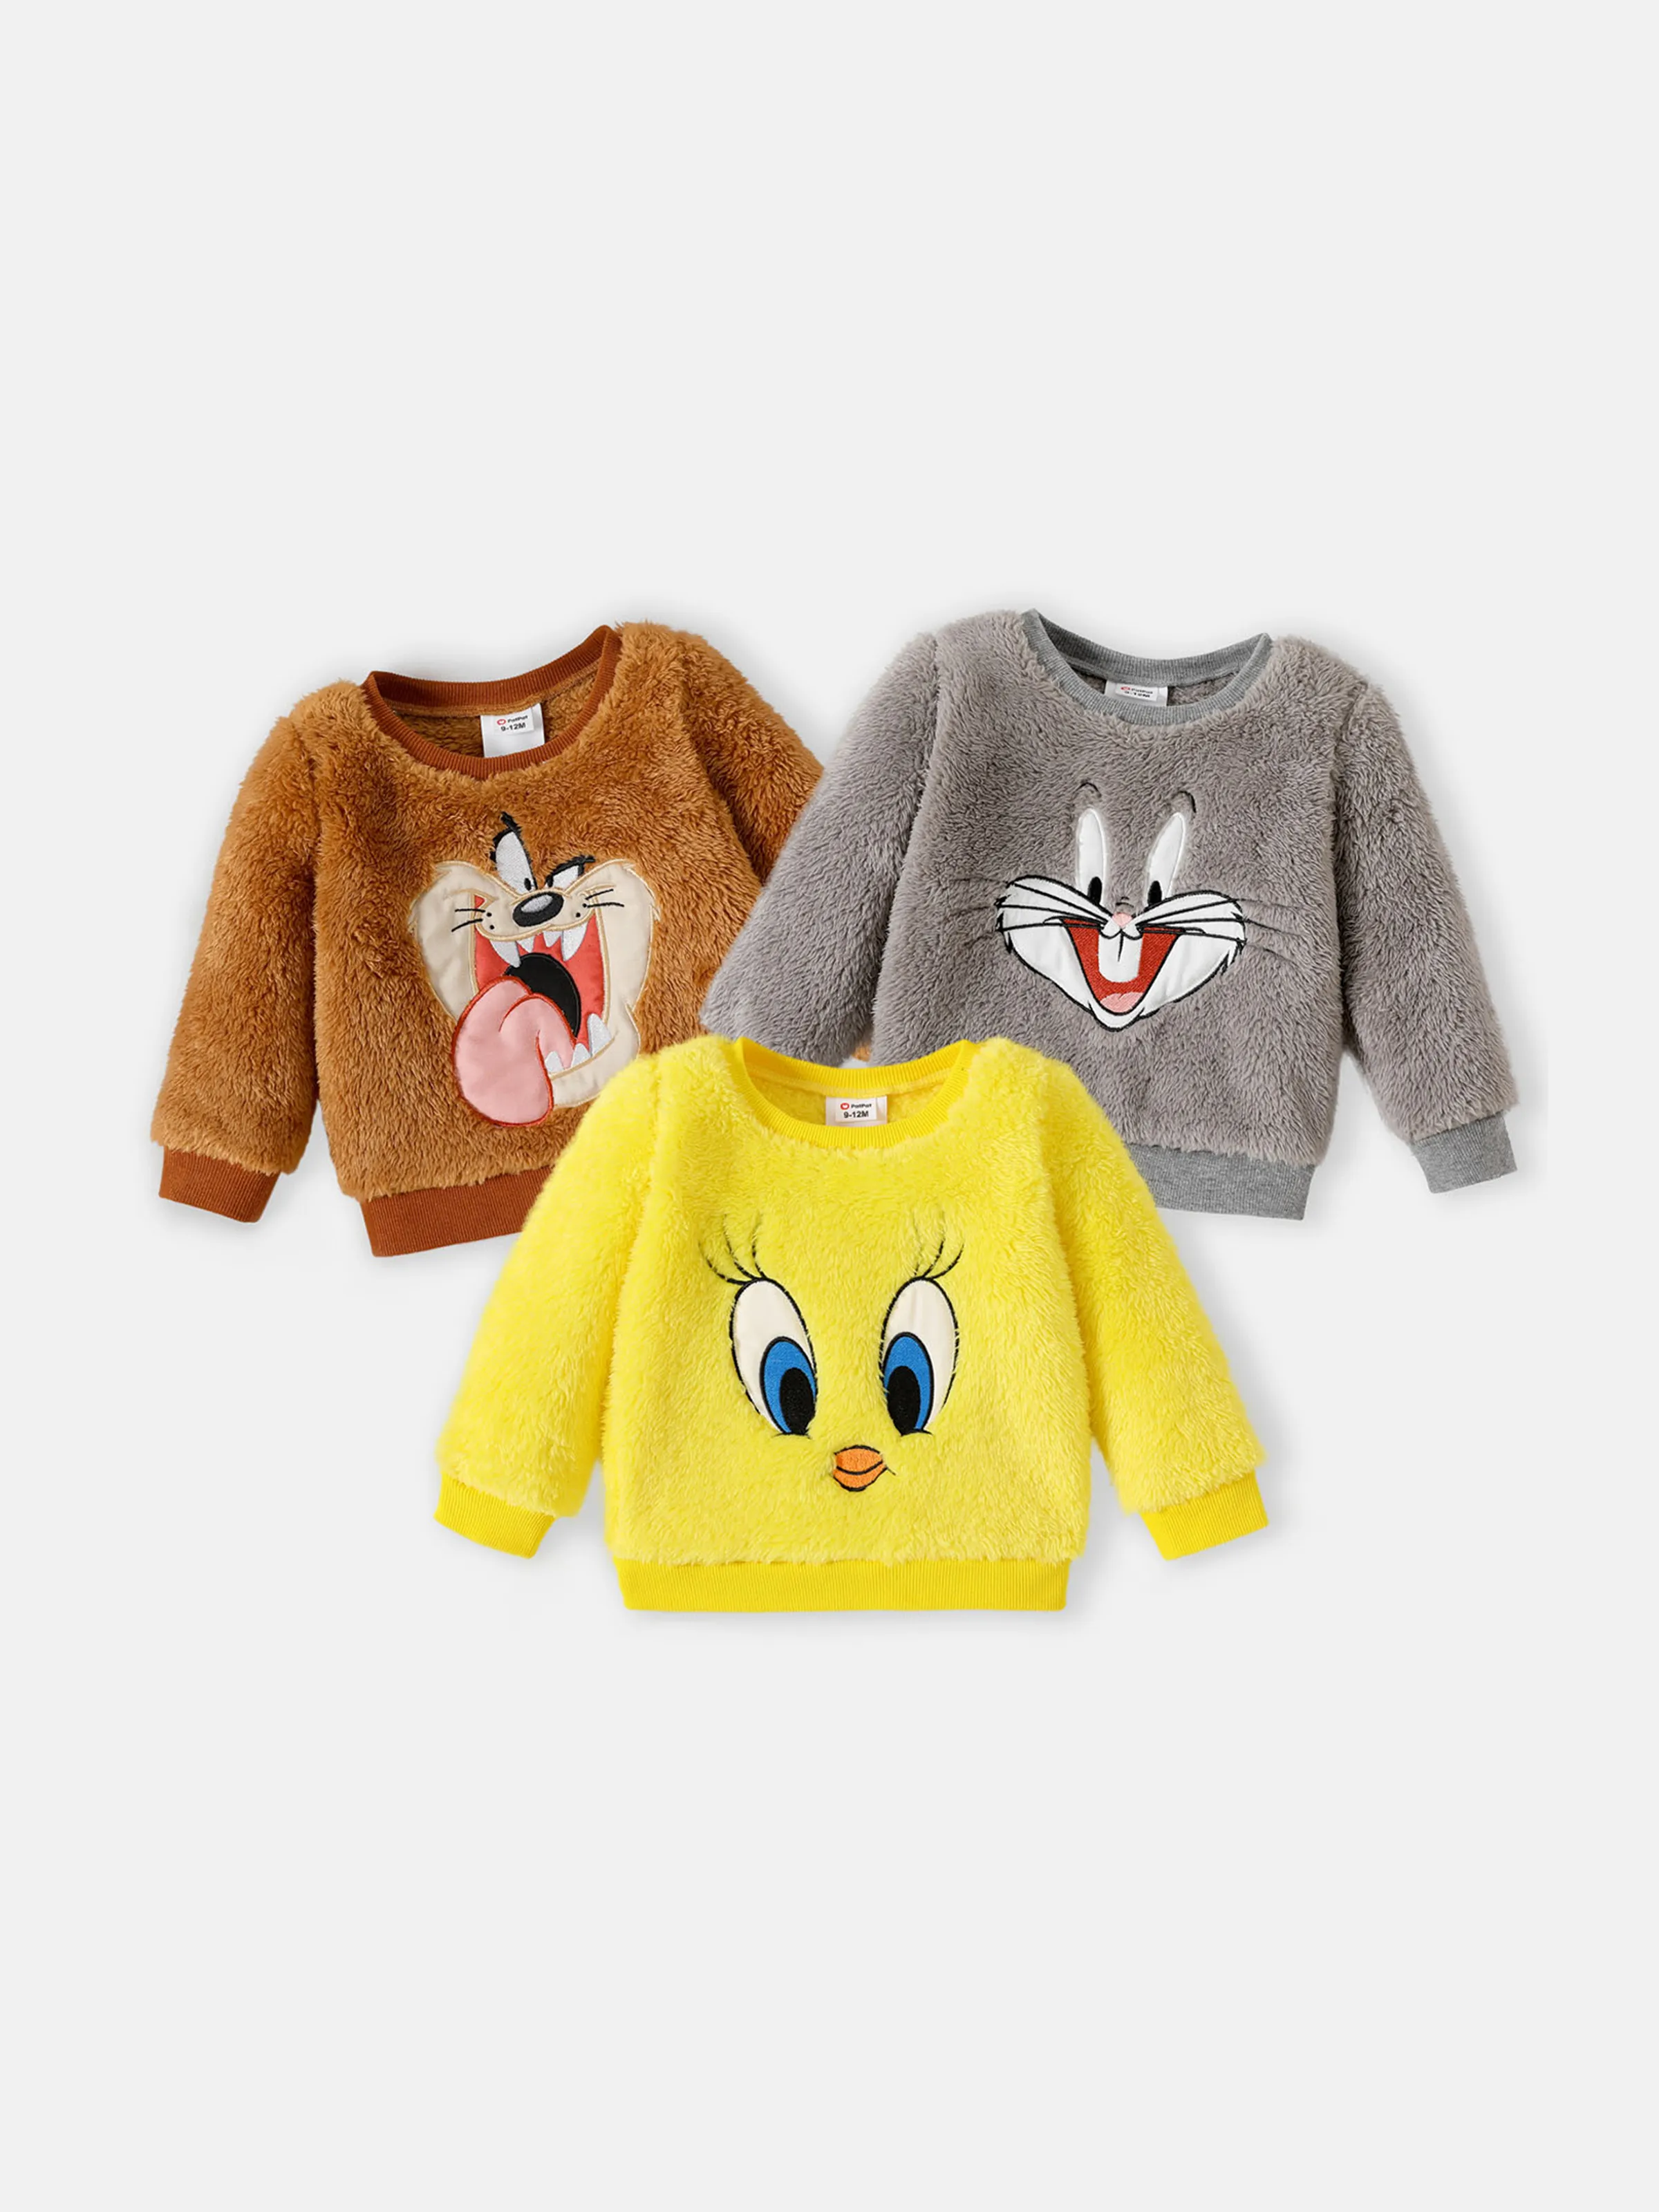 

Looney Tunes Baby Boy/Girl Cartoon Animal Embroidered Long-sleeve Thermal Fuzzy Pullover